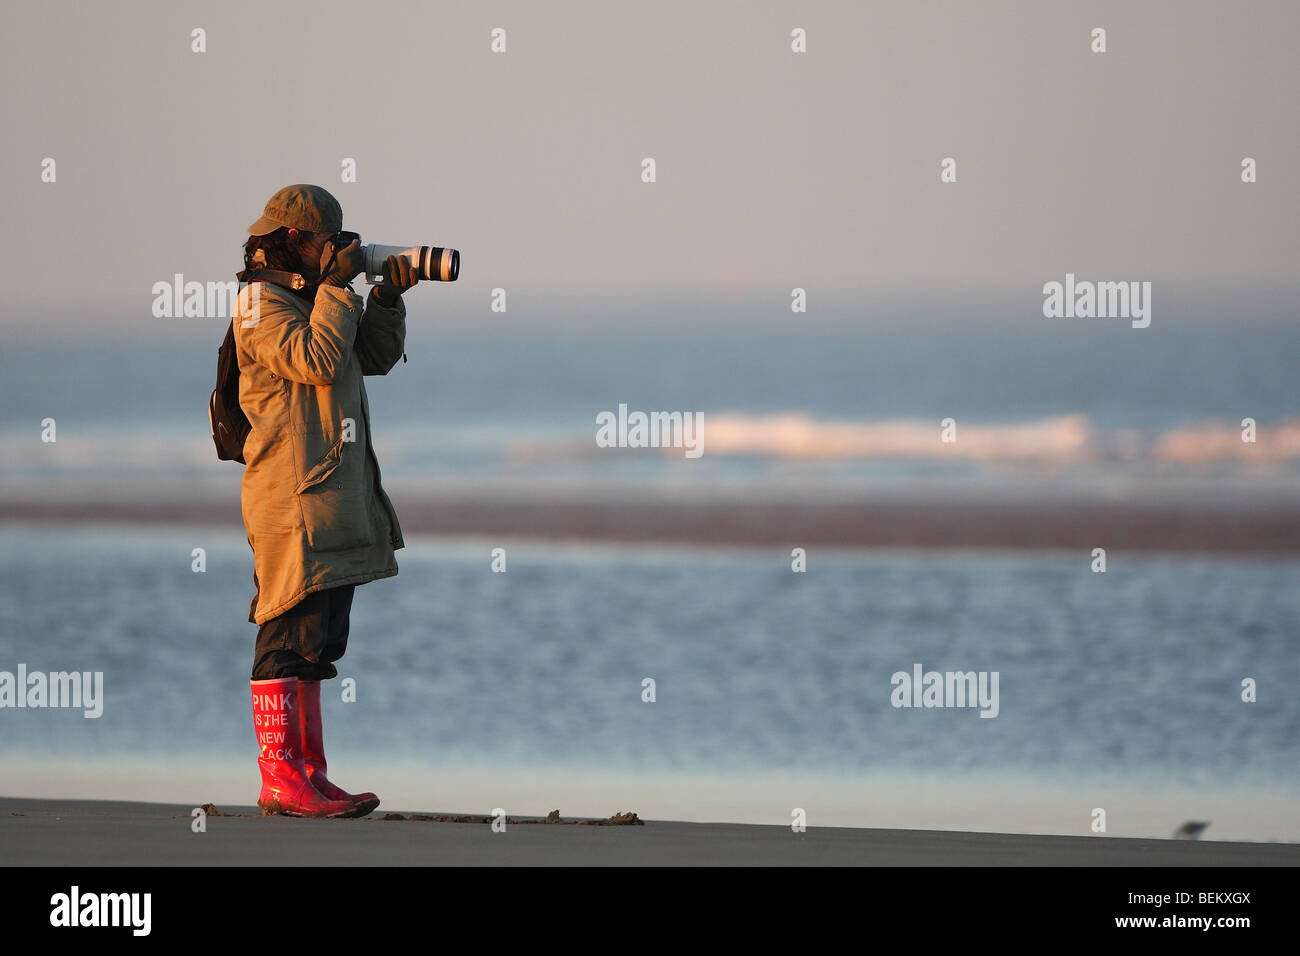 Nature photographer in action on beach Stock Photo